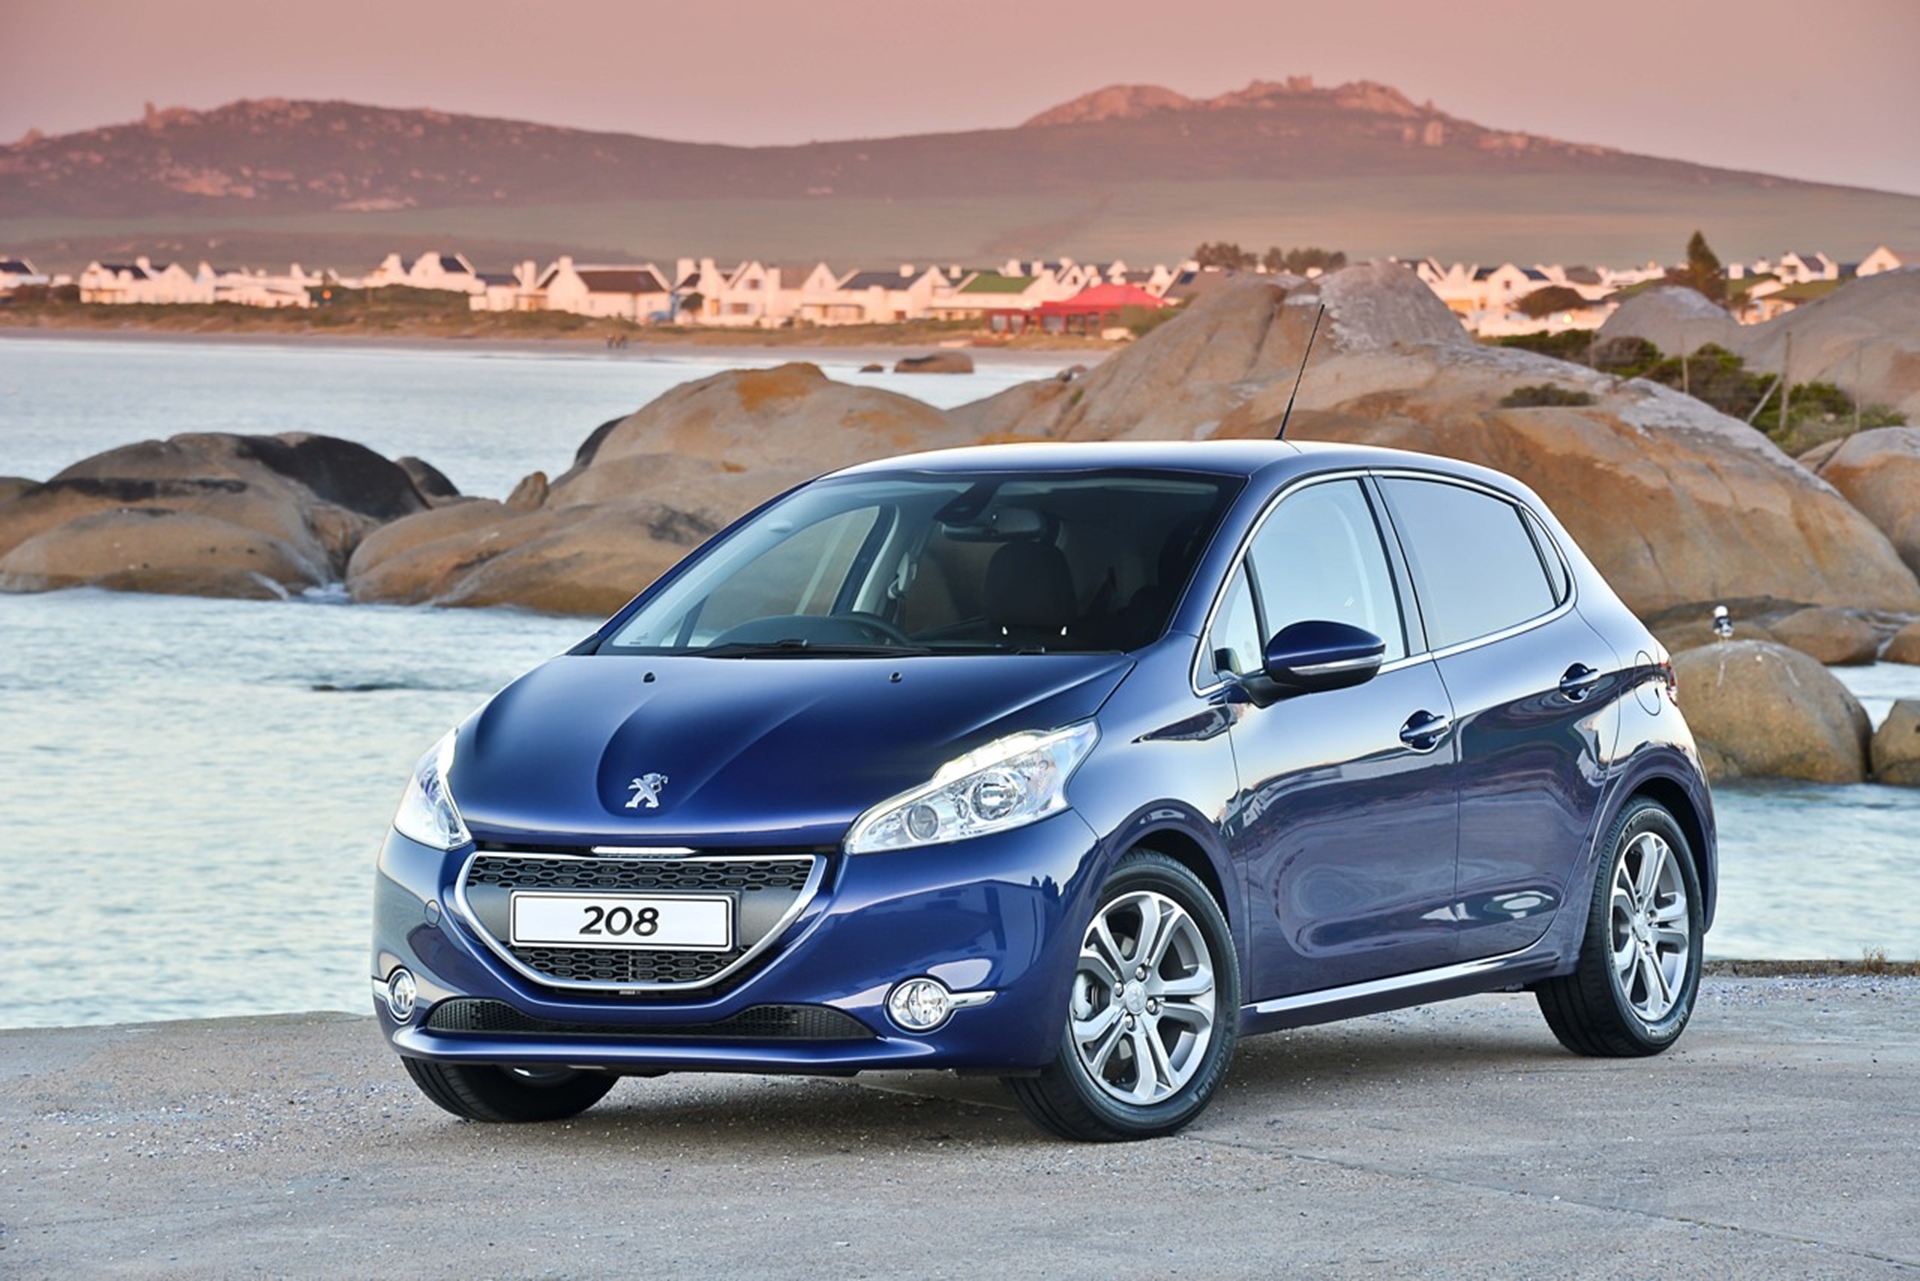 PEUGEOT 208: OVERVIEW